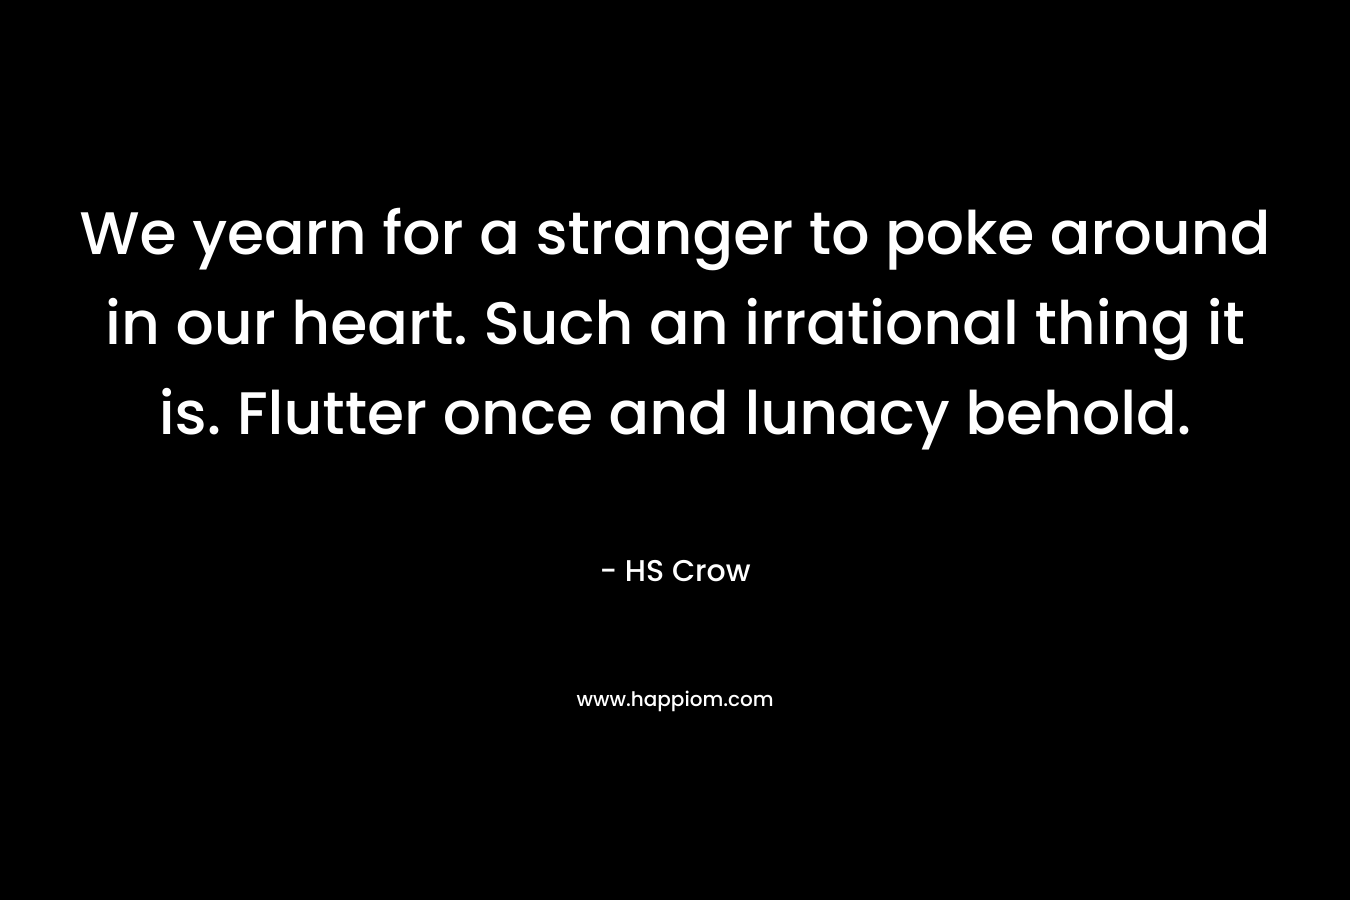 We yearn for a stranger to poke around in our heart. Such an irrational thing it is. Flutter once and lunacy behold. – HS Crow